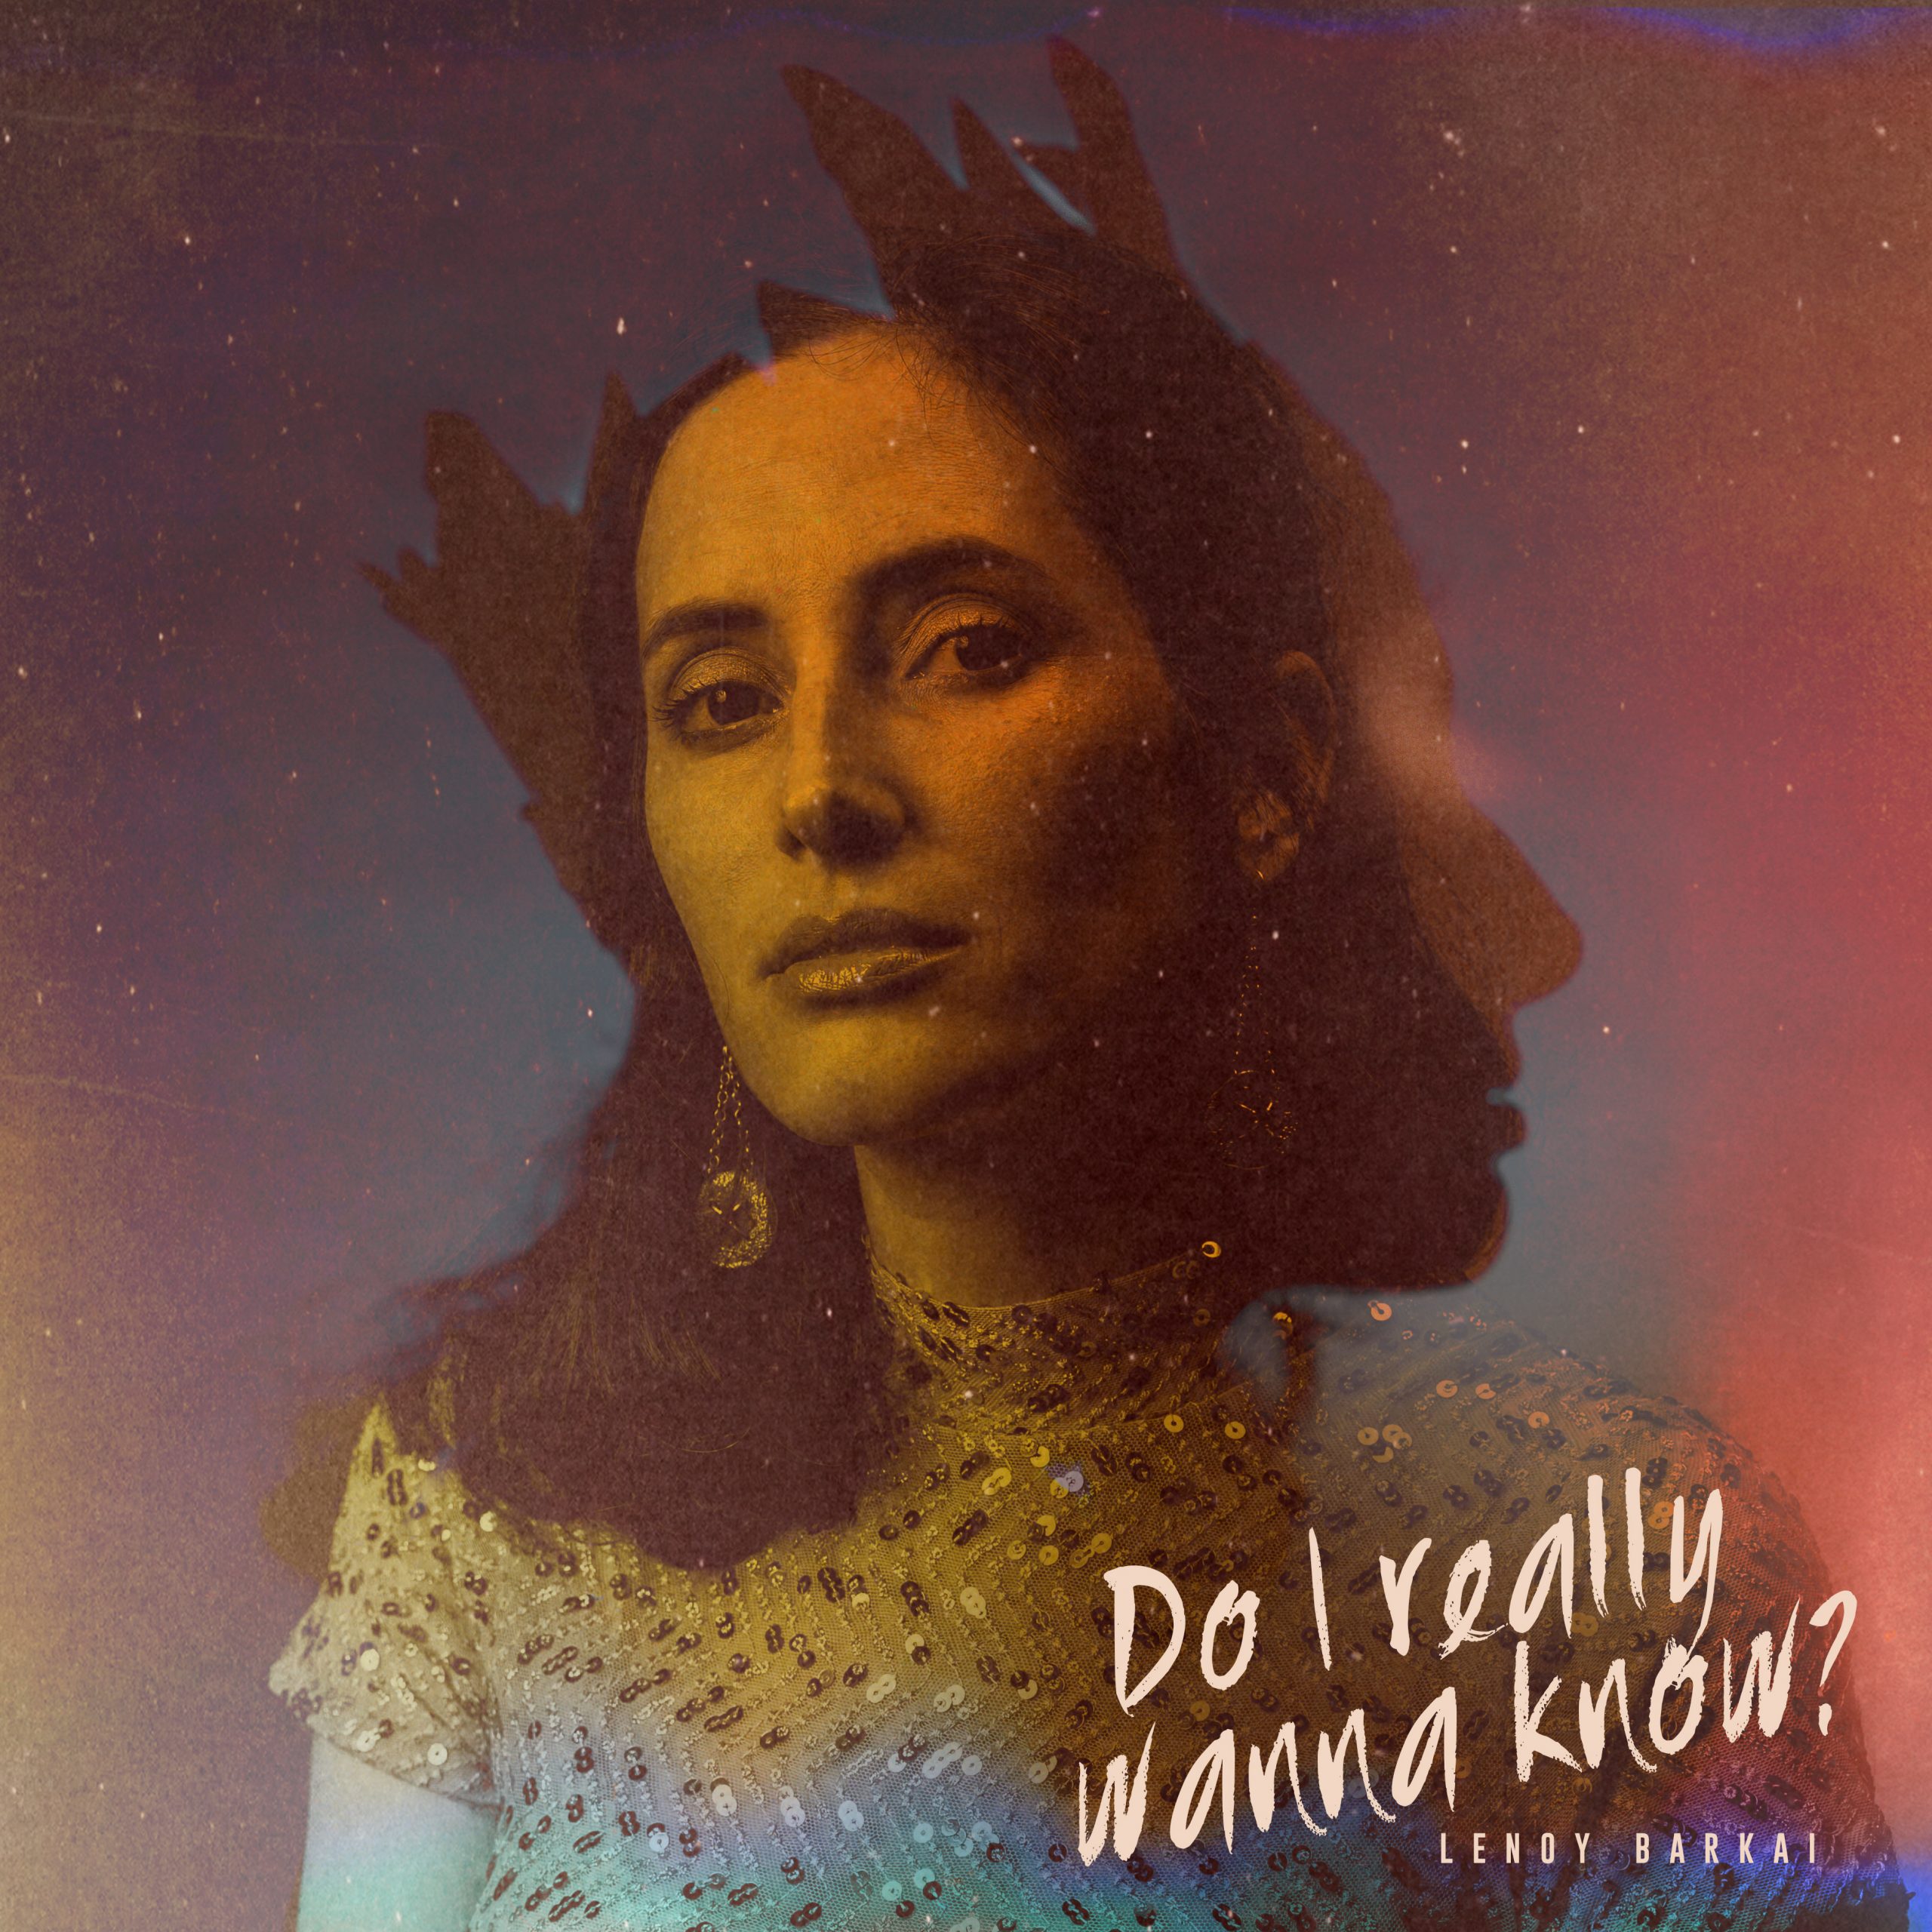 “I set out to try something new and pushed myself further beyond my comfort zone” says ‘Lenoy Barkai’ as she releases epic new single “Do I Really Wanna Know?”.